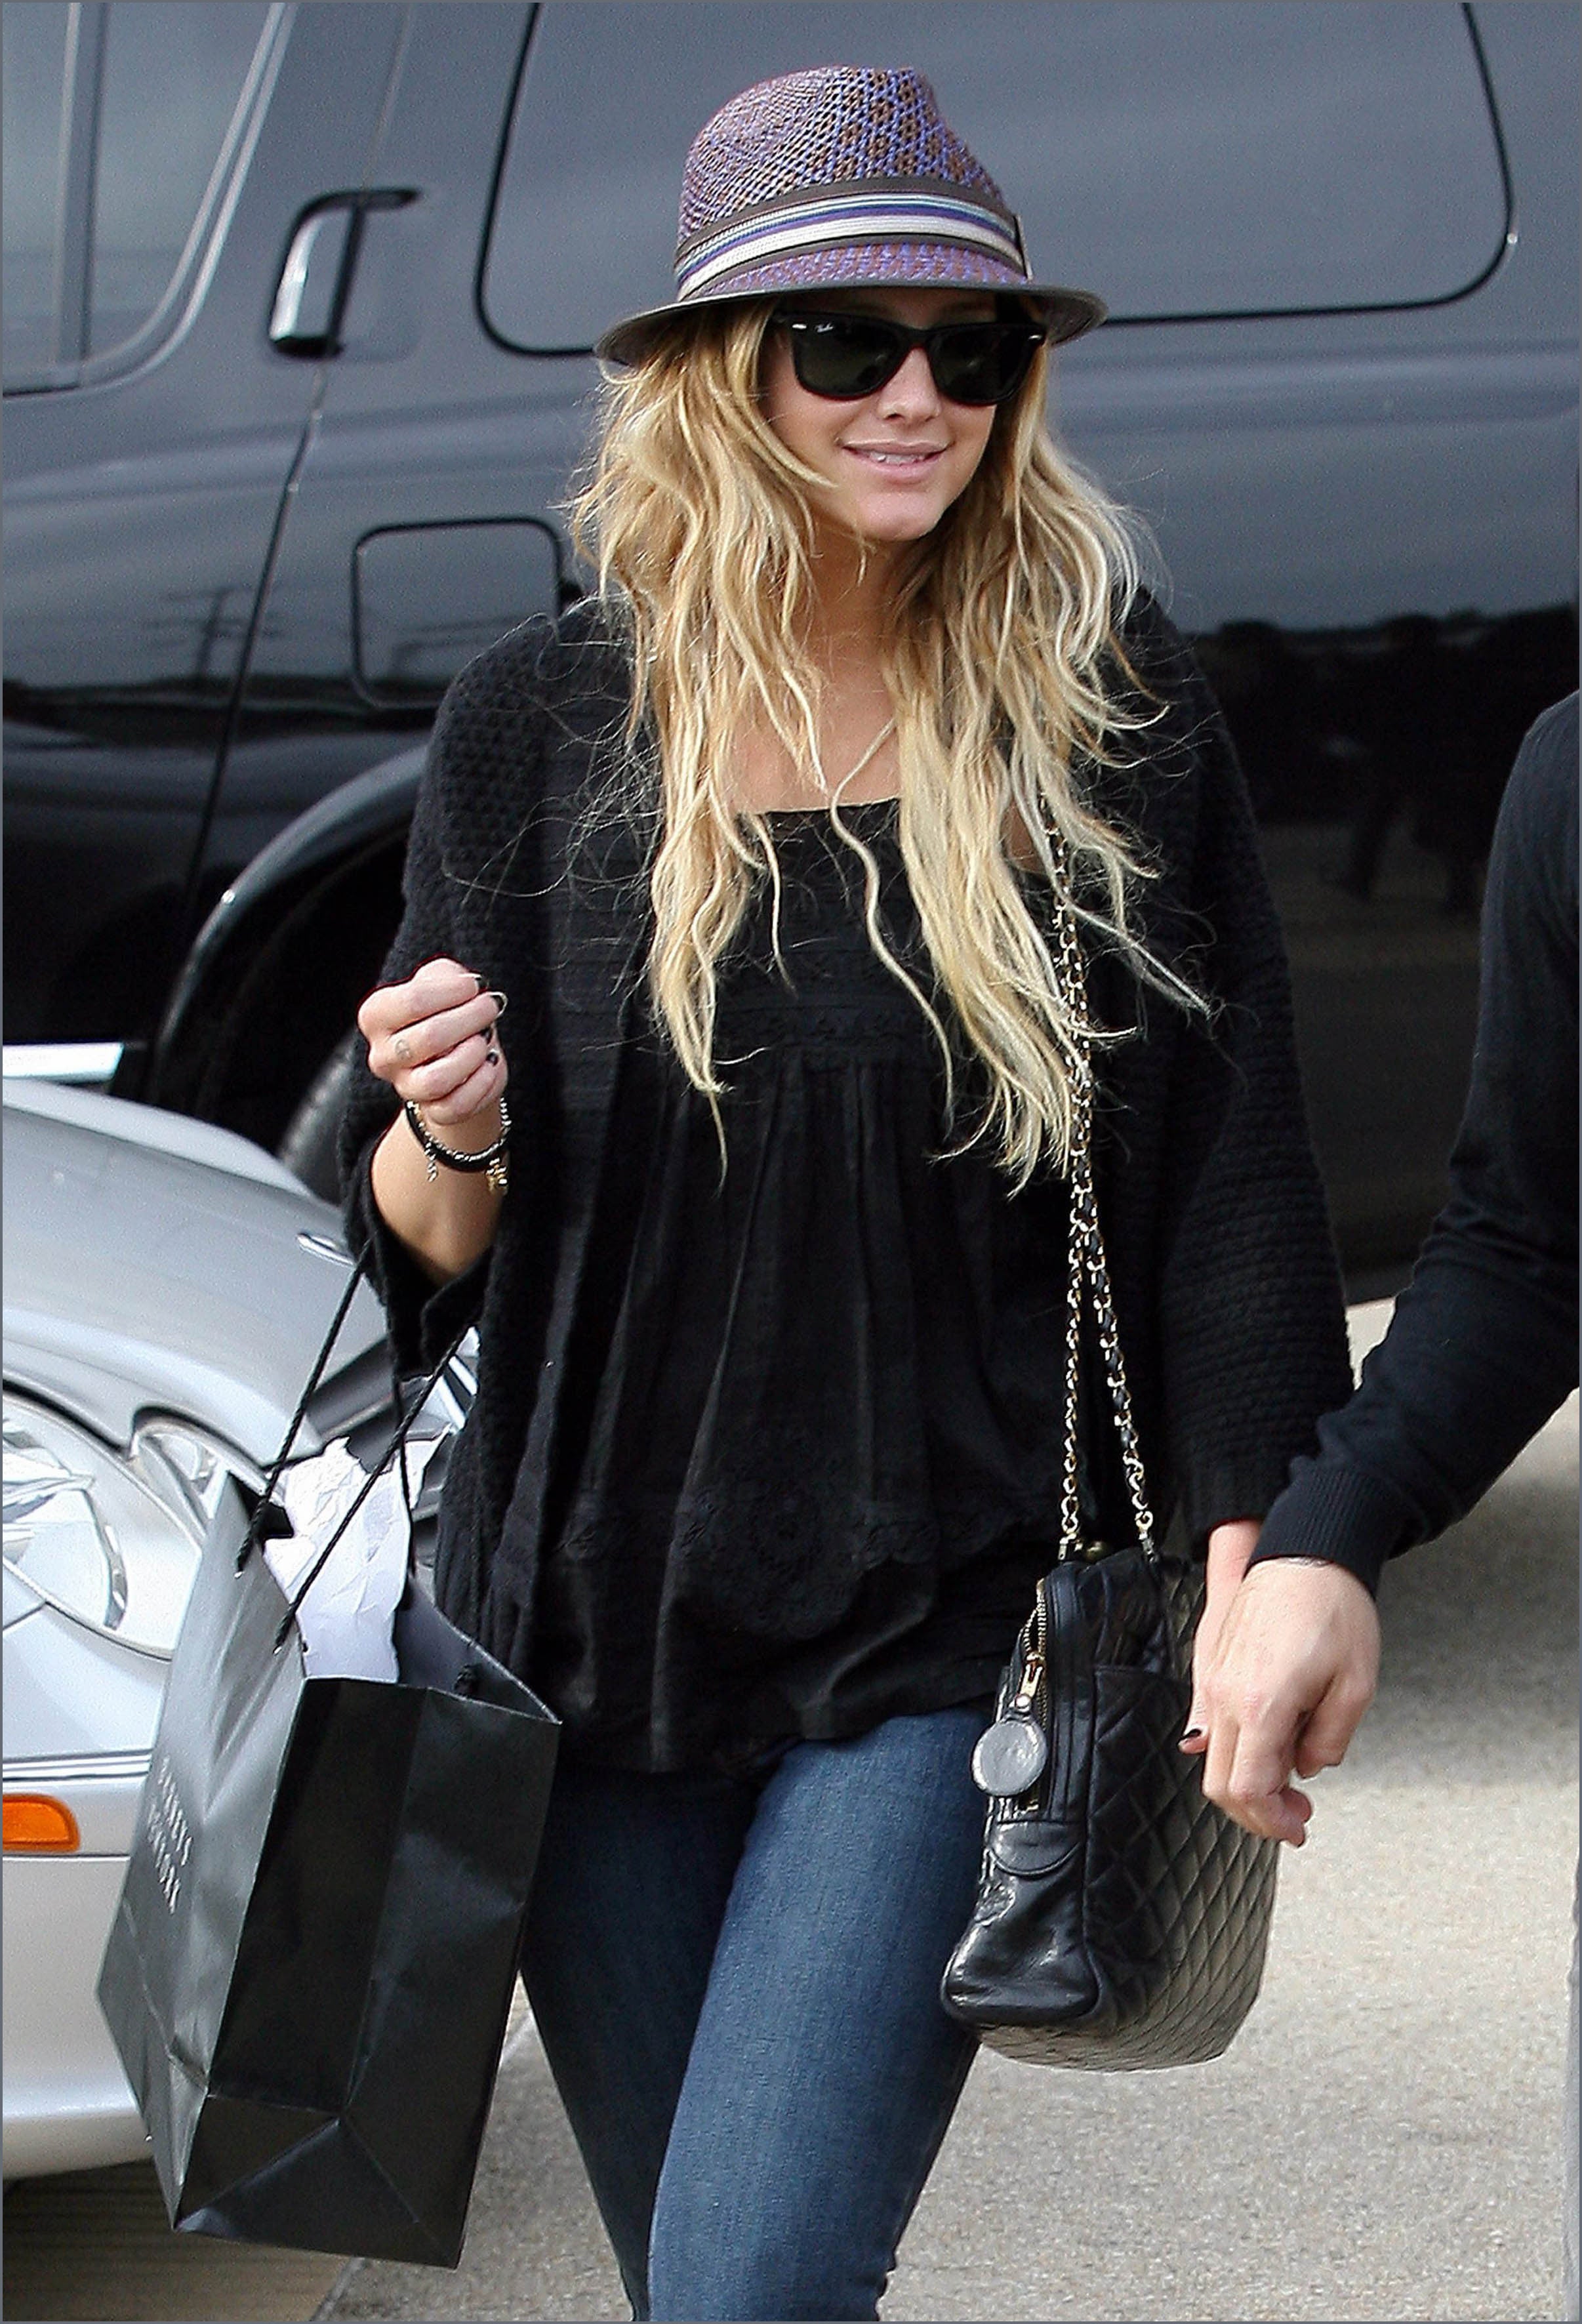 Ashlee Simpson wears a straw fedora from Cha Cha's House of Ill Repute, a hat shop in NYC